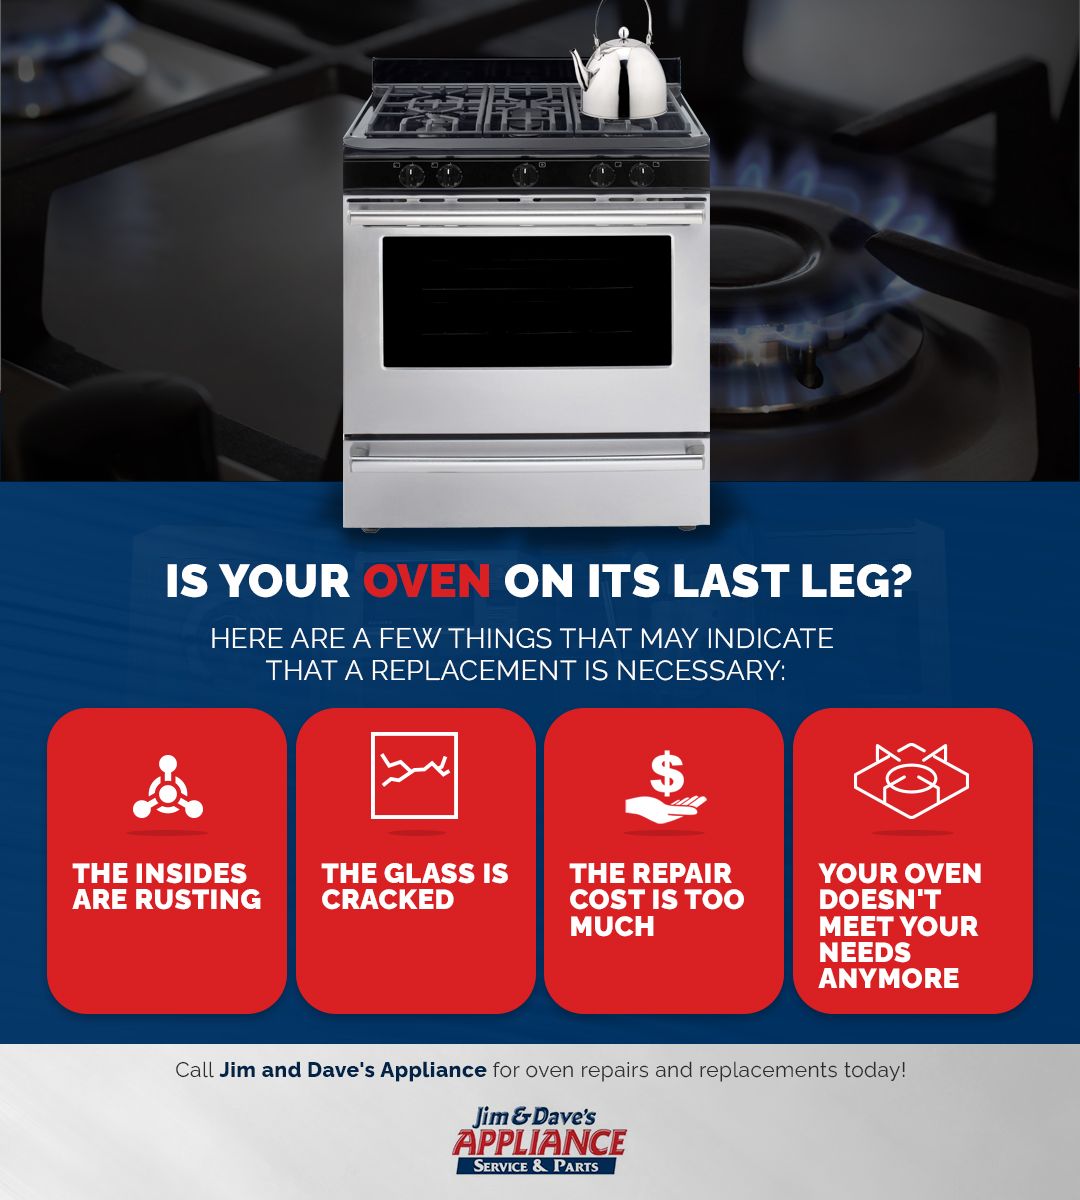 OvenReplacement-Infographic-62bc796dcfcd7.jpg